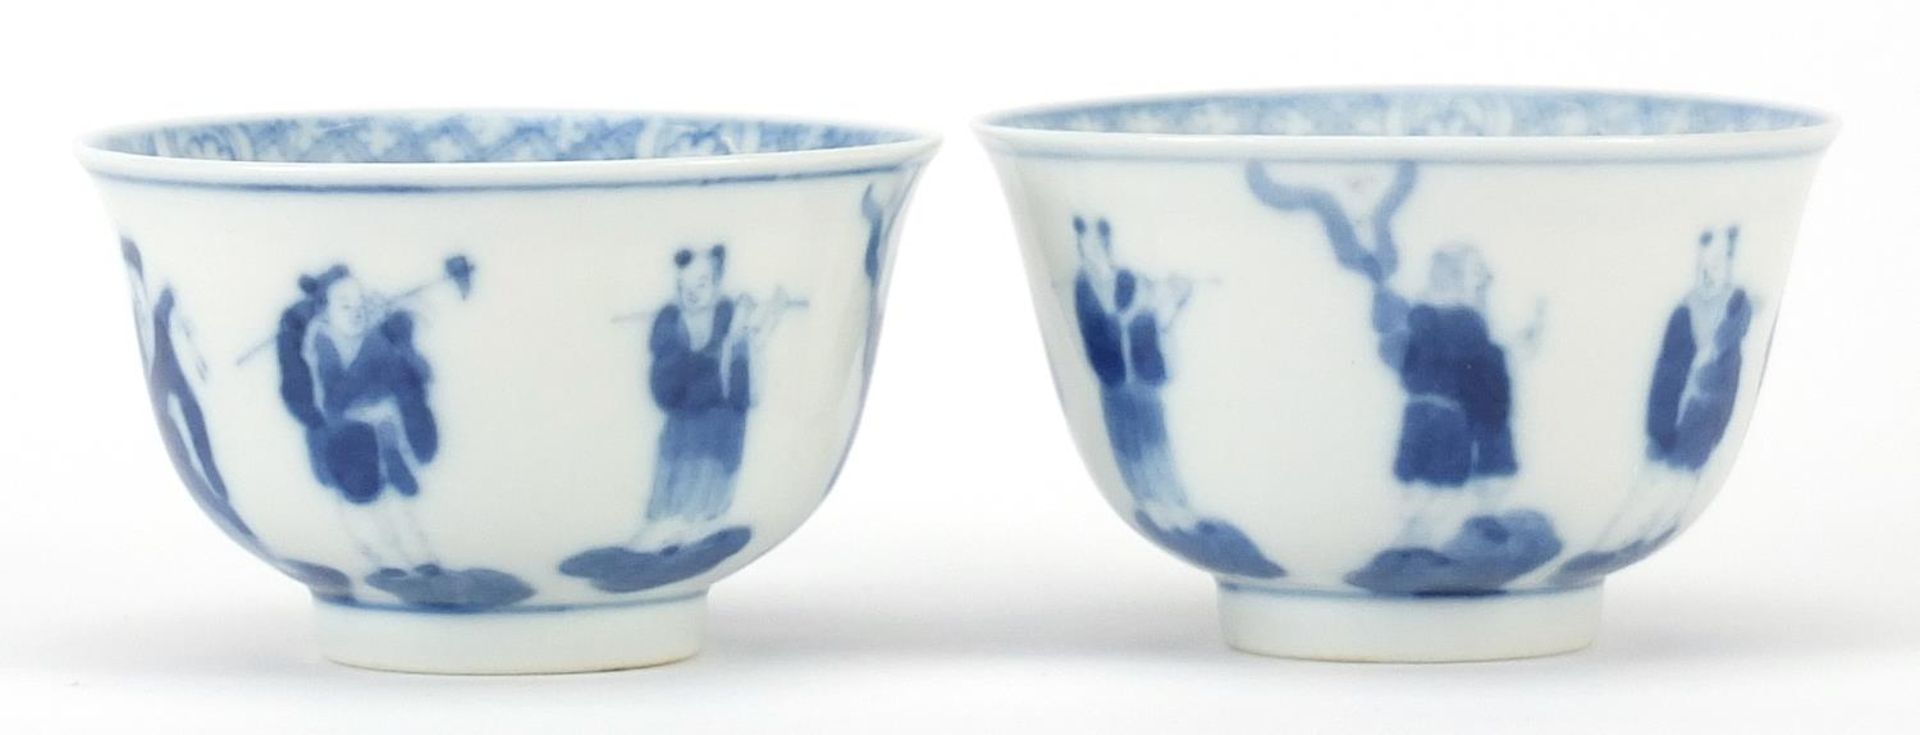 Pair of Chinese blue and white porcelain tea bowls hand painted with figures, four figure - Image 2 of 3